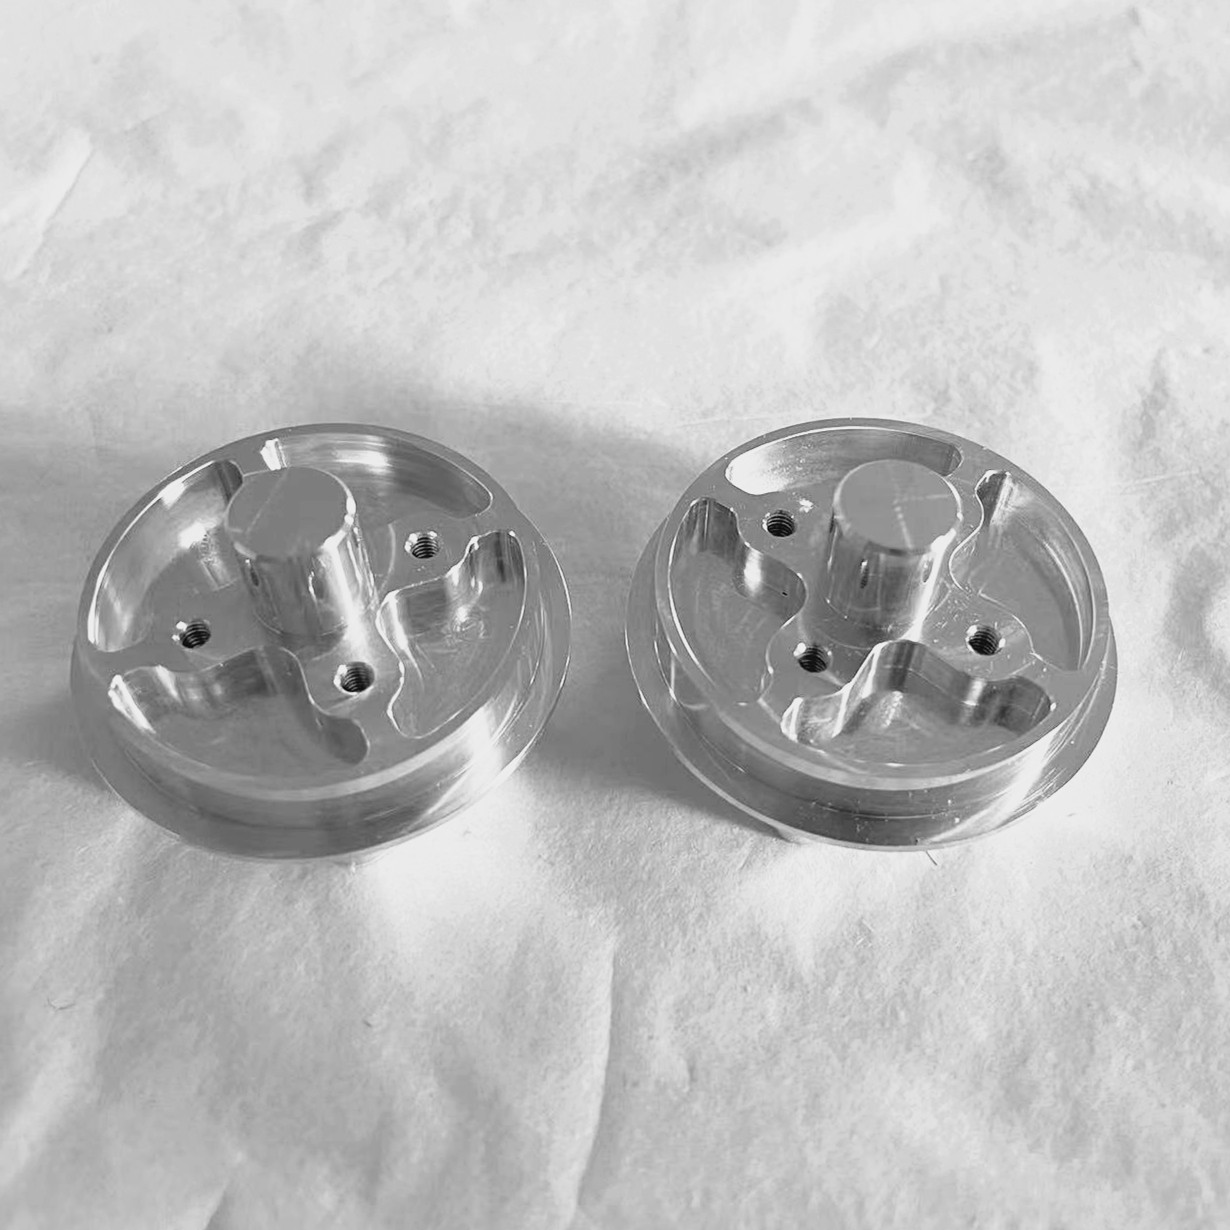 Aluminum Machined Parts for DRONE PARTS